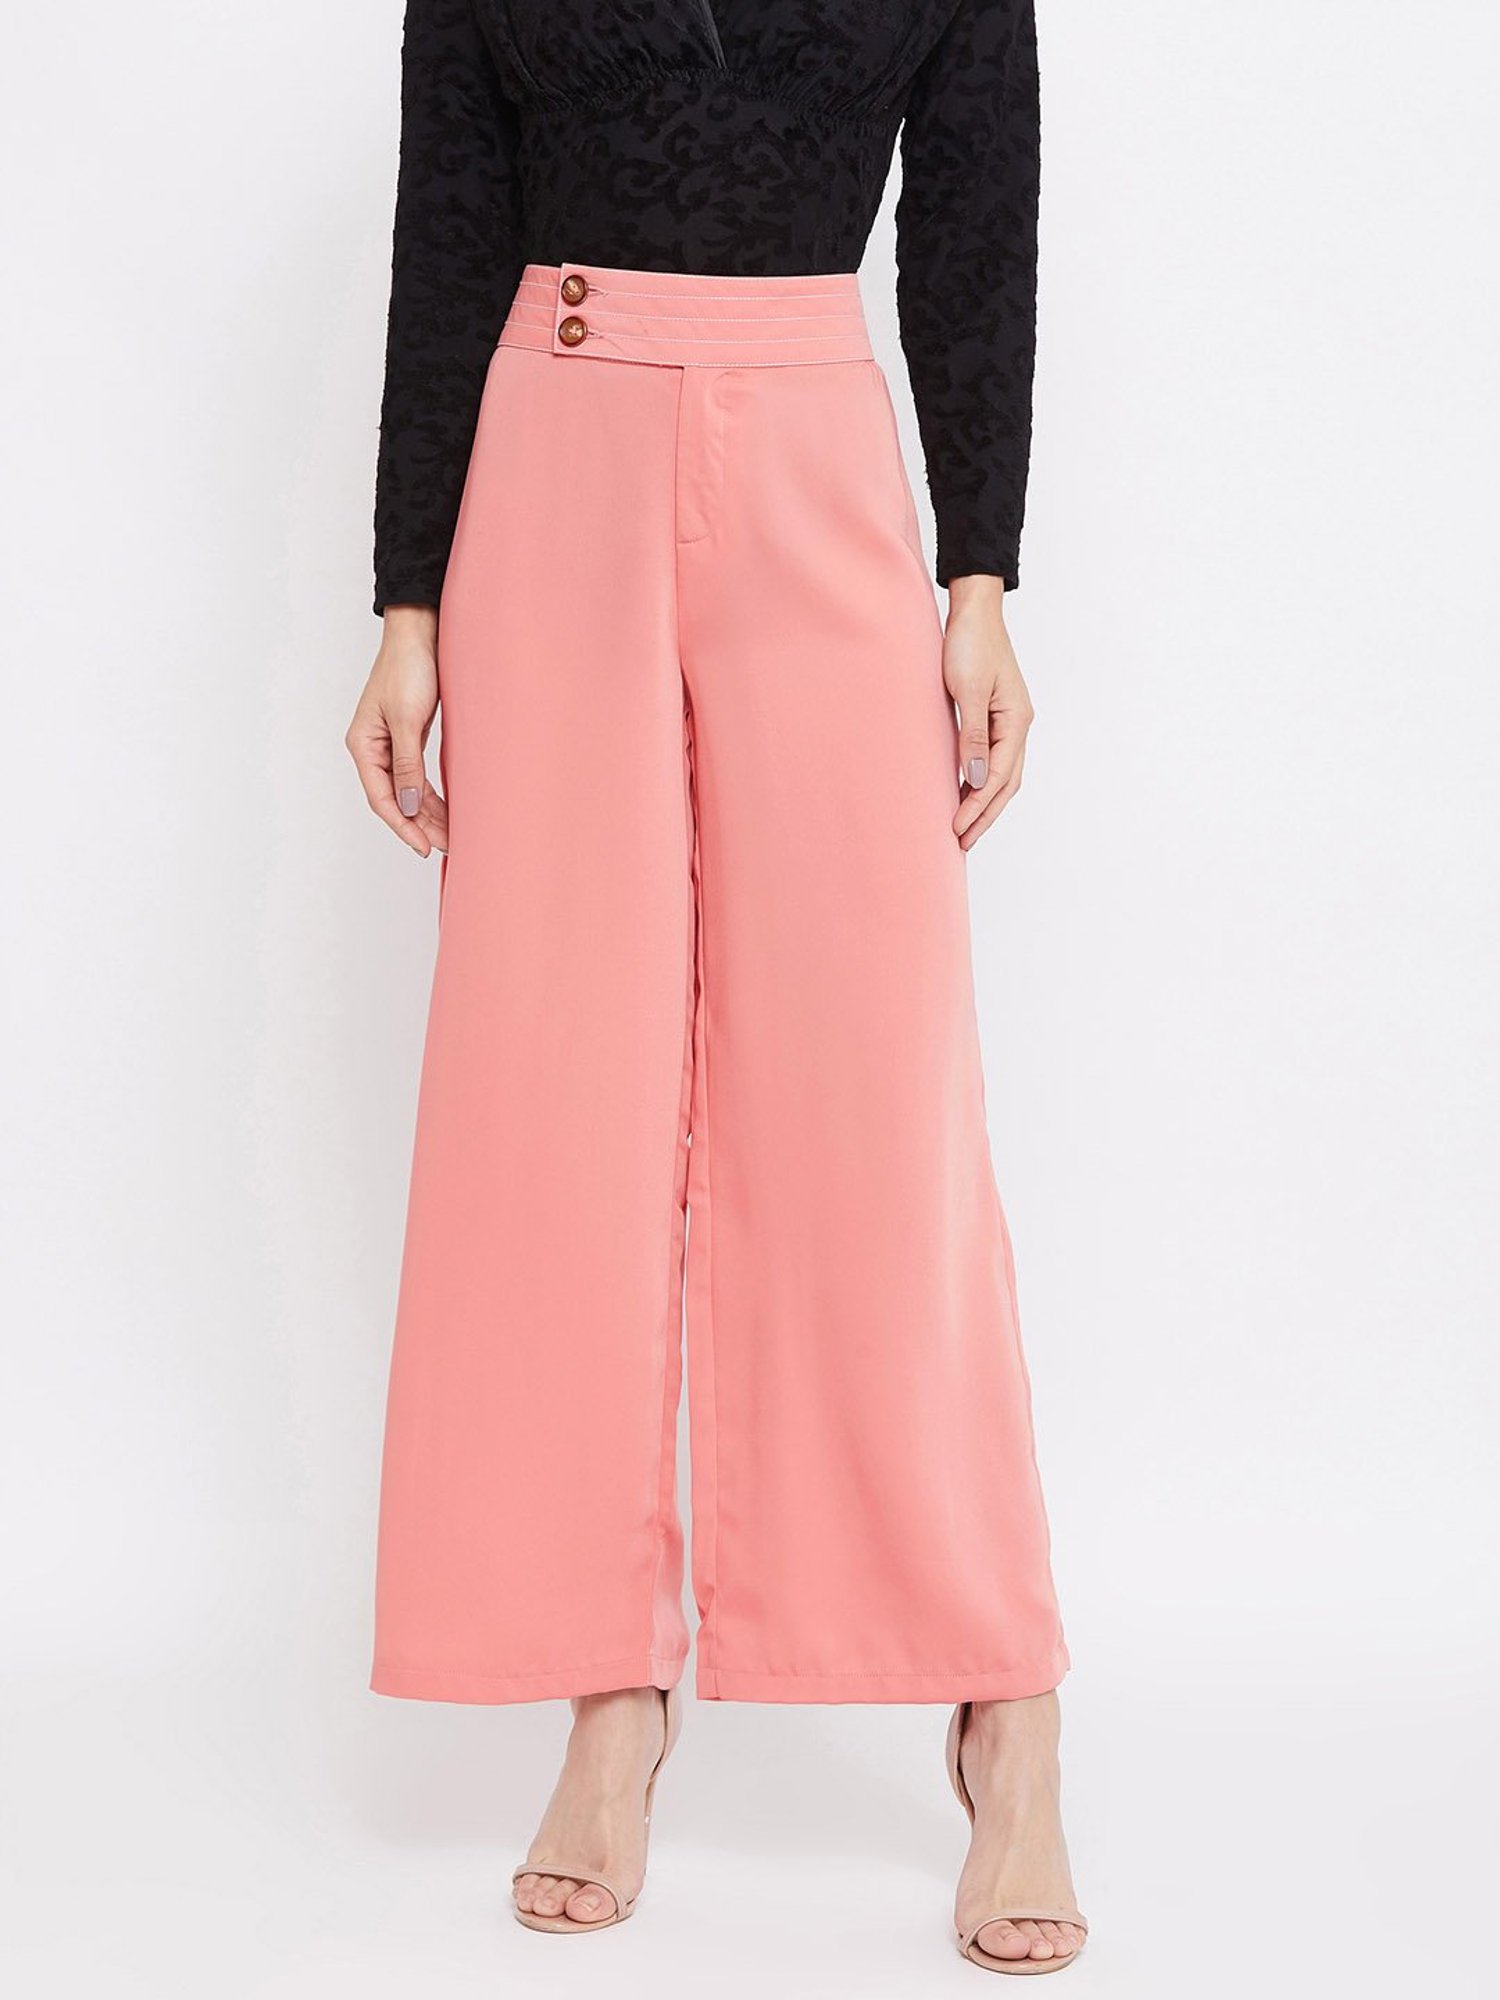 Pink Bottoms for Women  Buy Pink Indo Western Pants for Girls Online India   Indya